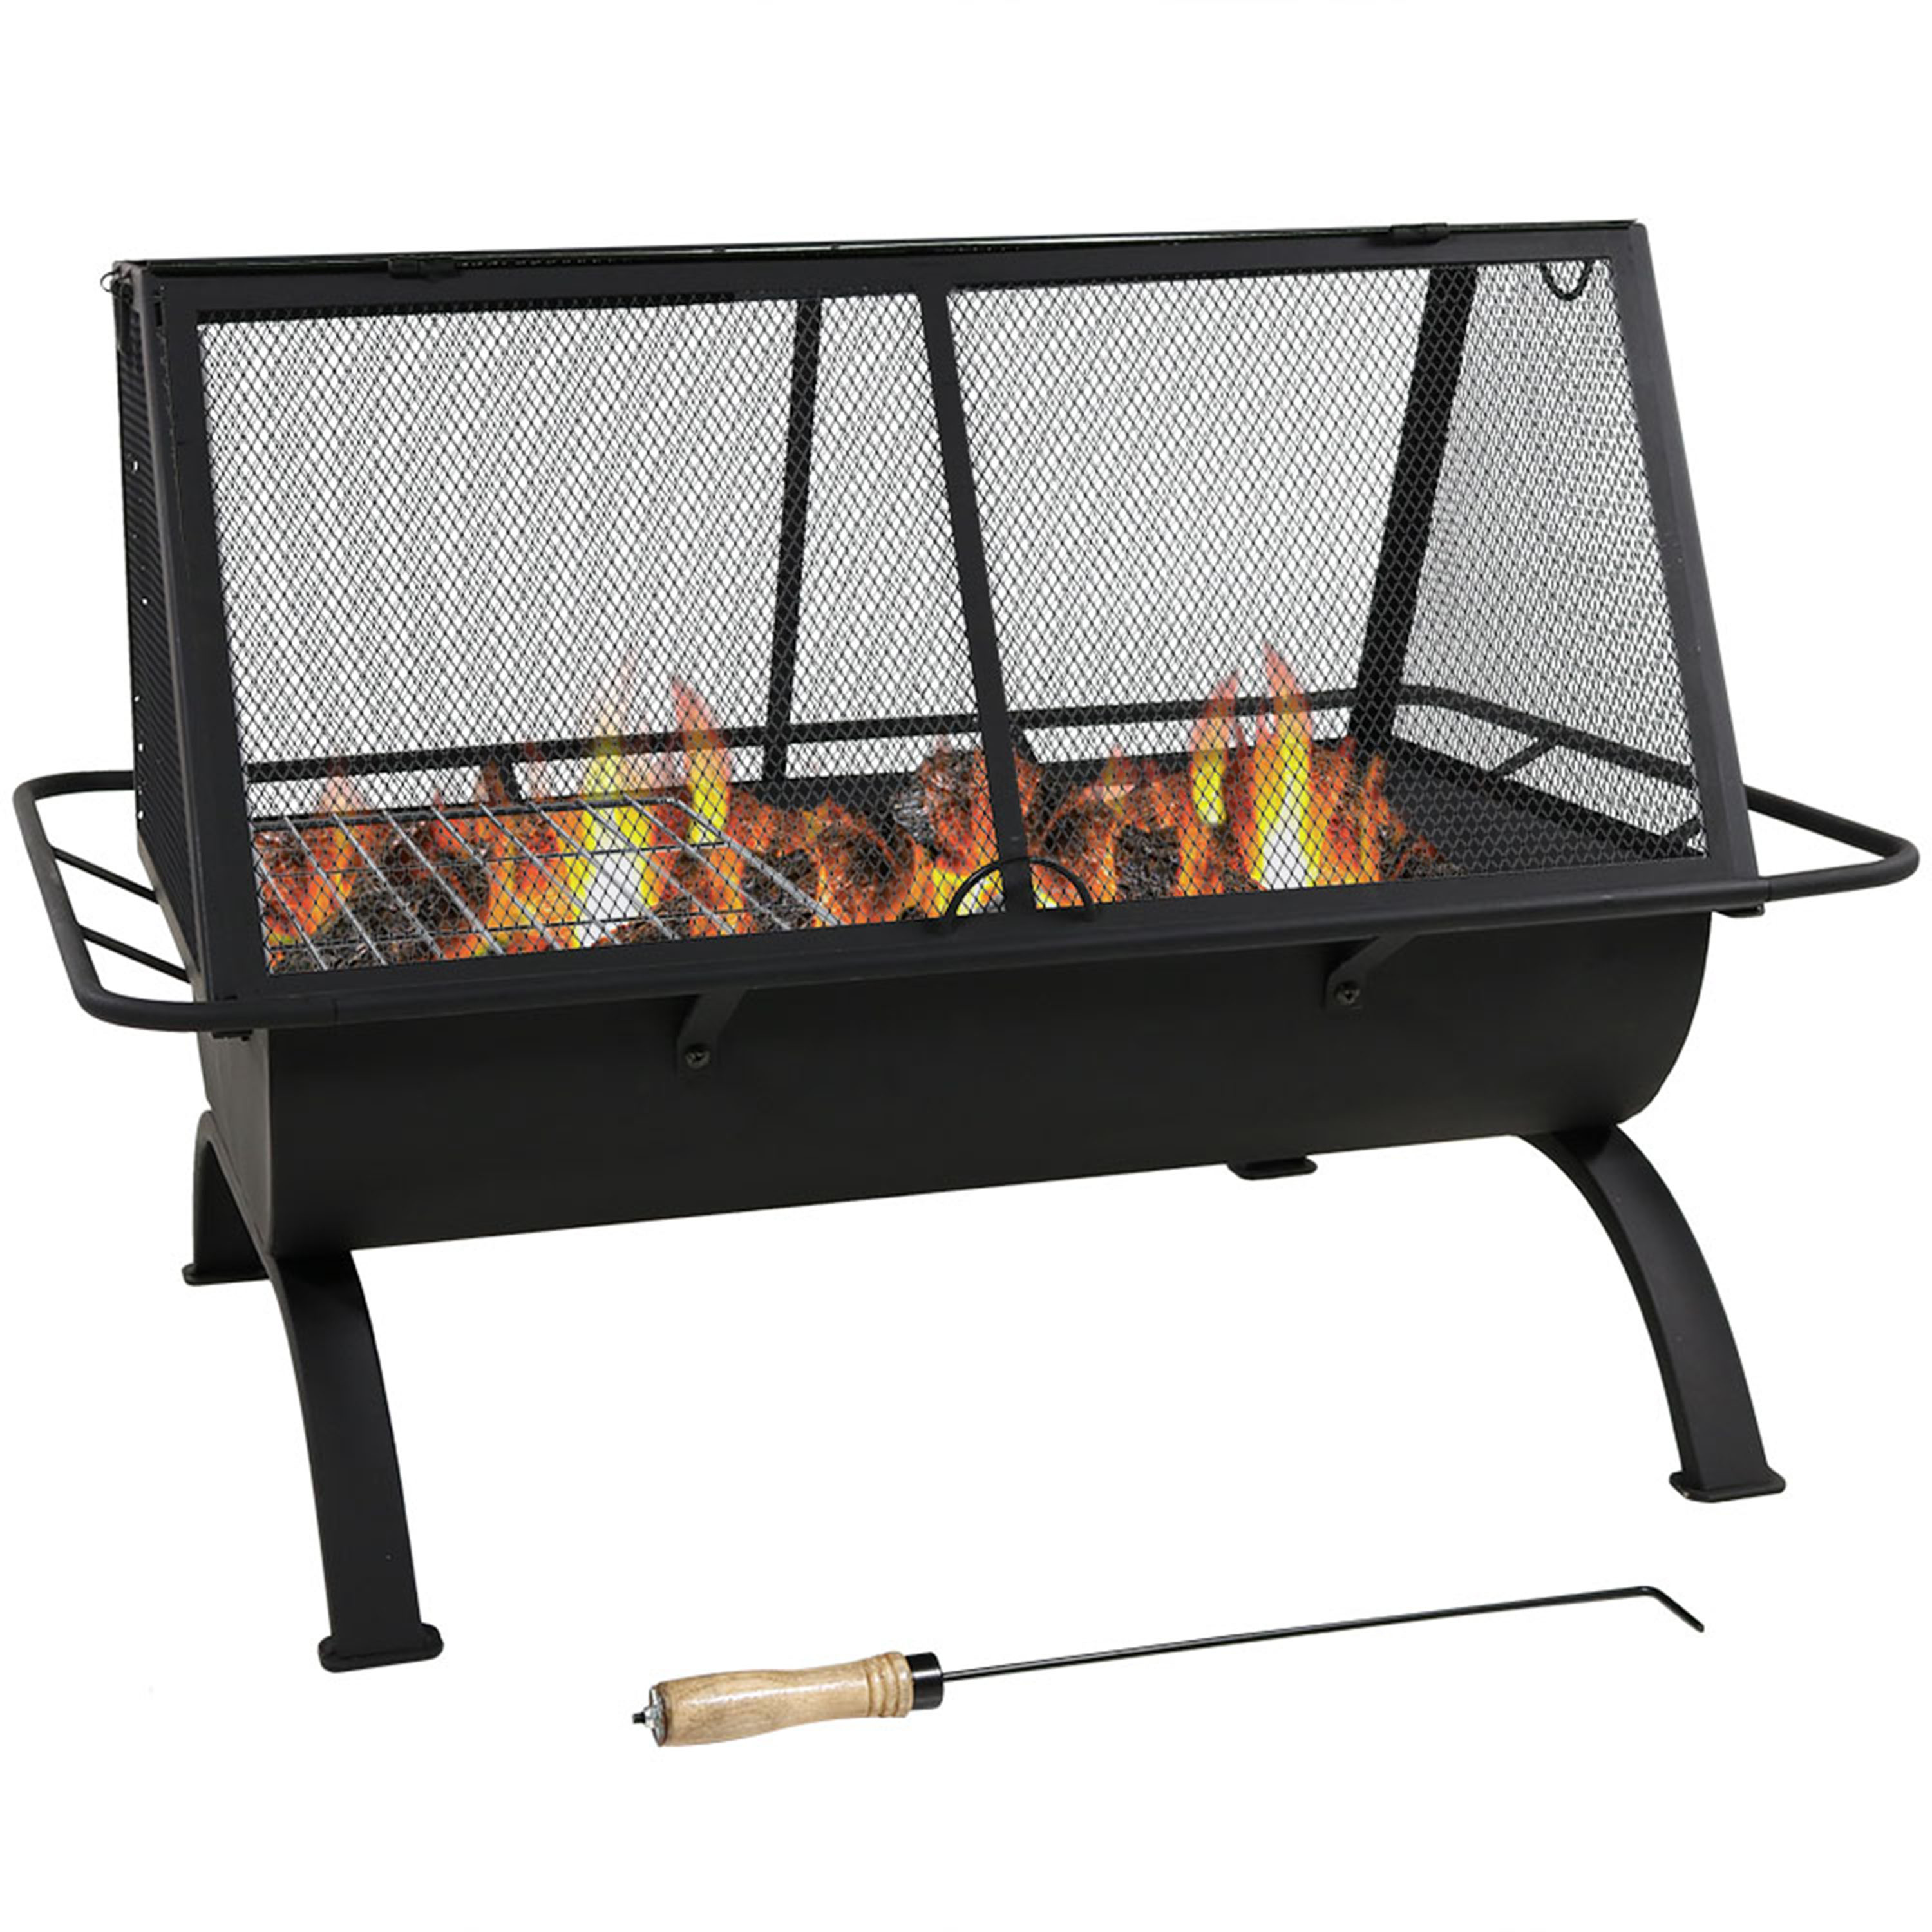 Sunnydaze Northland Grill Fire Pit with Protective Cover - 36-Inch